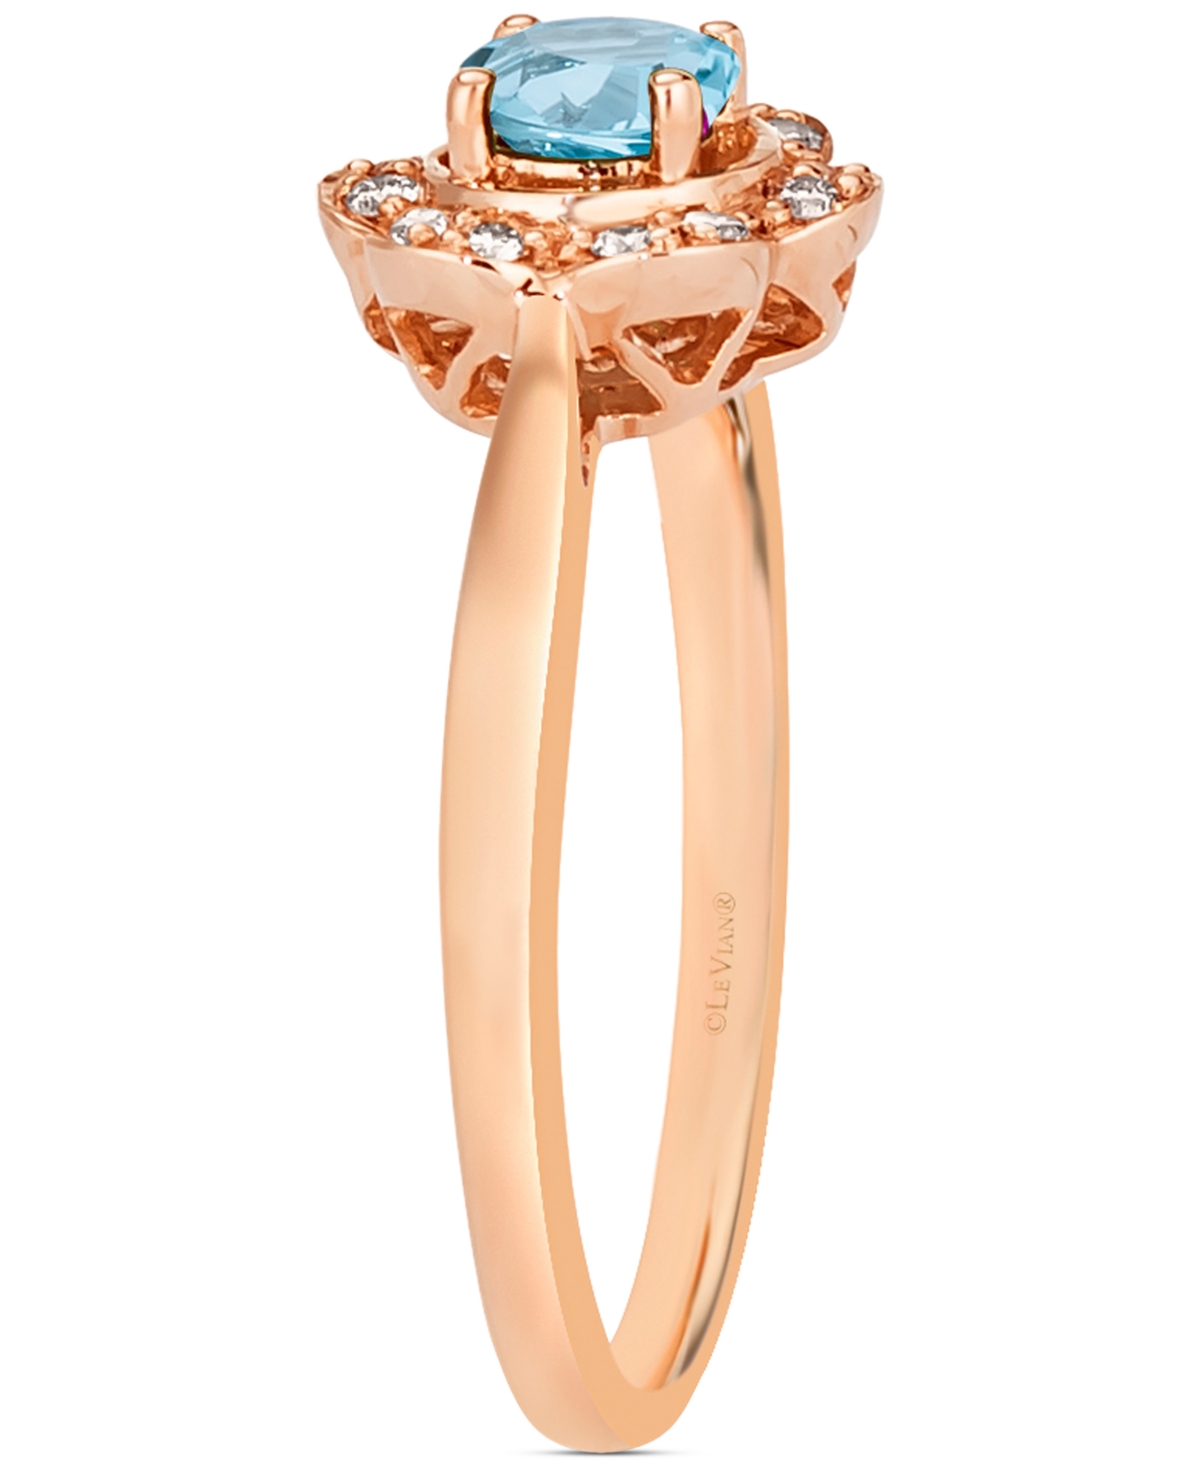 Shop Le Vian Blueberry Sapphire (1/3 Ct. T.w.) & Vanilla Diamond (1/8 Ct. T.w.) Flower Halo Ring In 14k Rose Gold In No Color